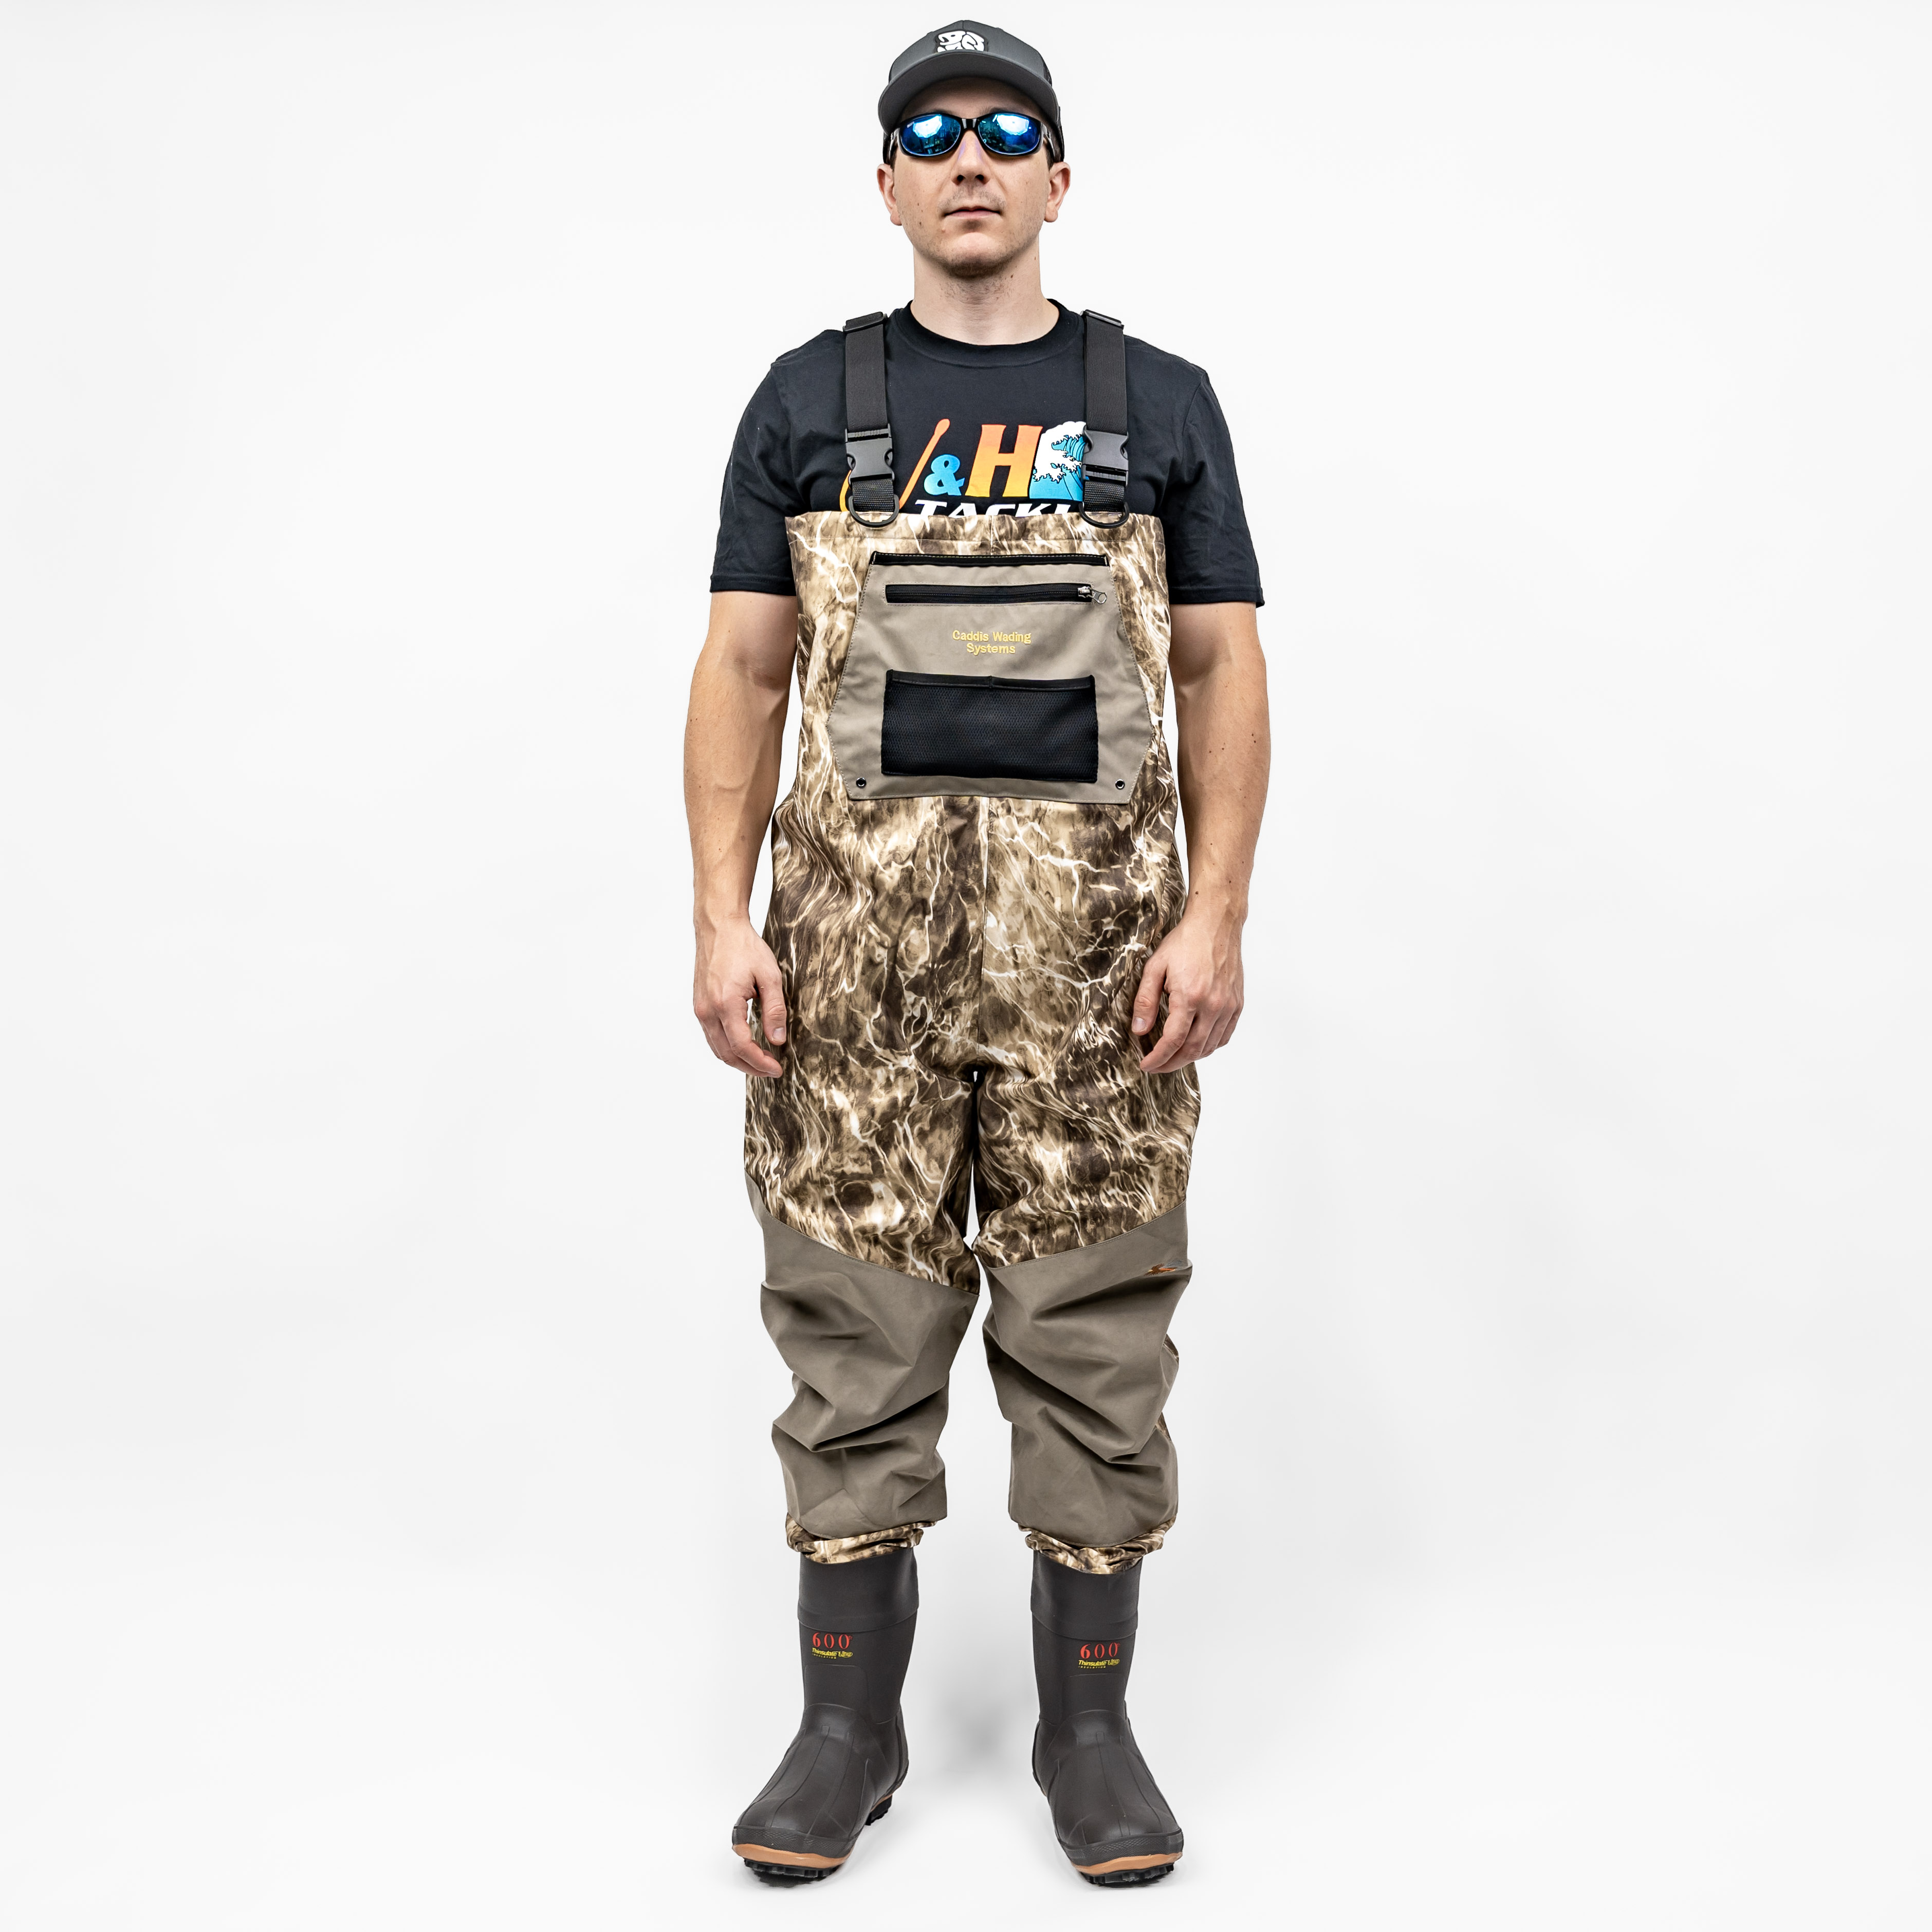 https://api.jandh.com/media/upload/category//e62ae-caddis-mossy-river-breathable-bootfoot-chest-wader.jpg